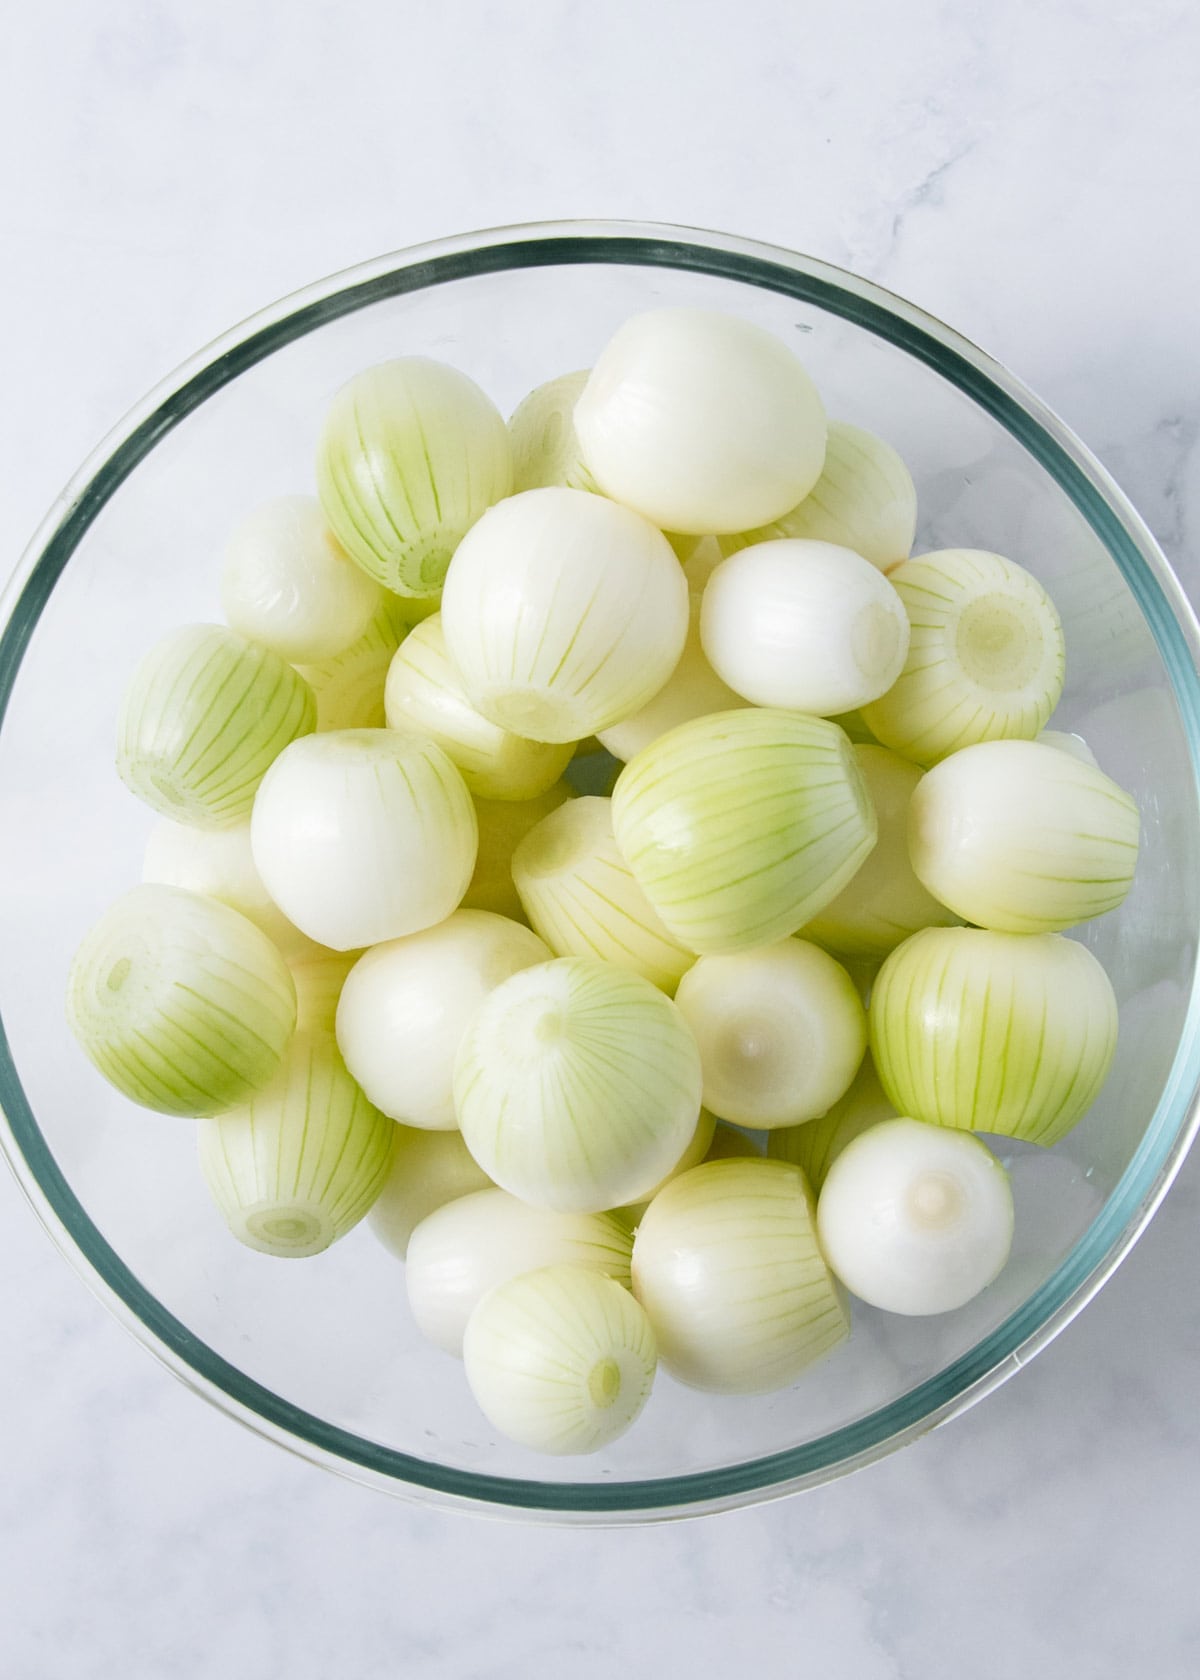 Peeled pickling onions in a glass bowl.